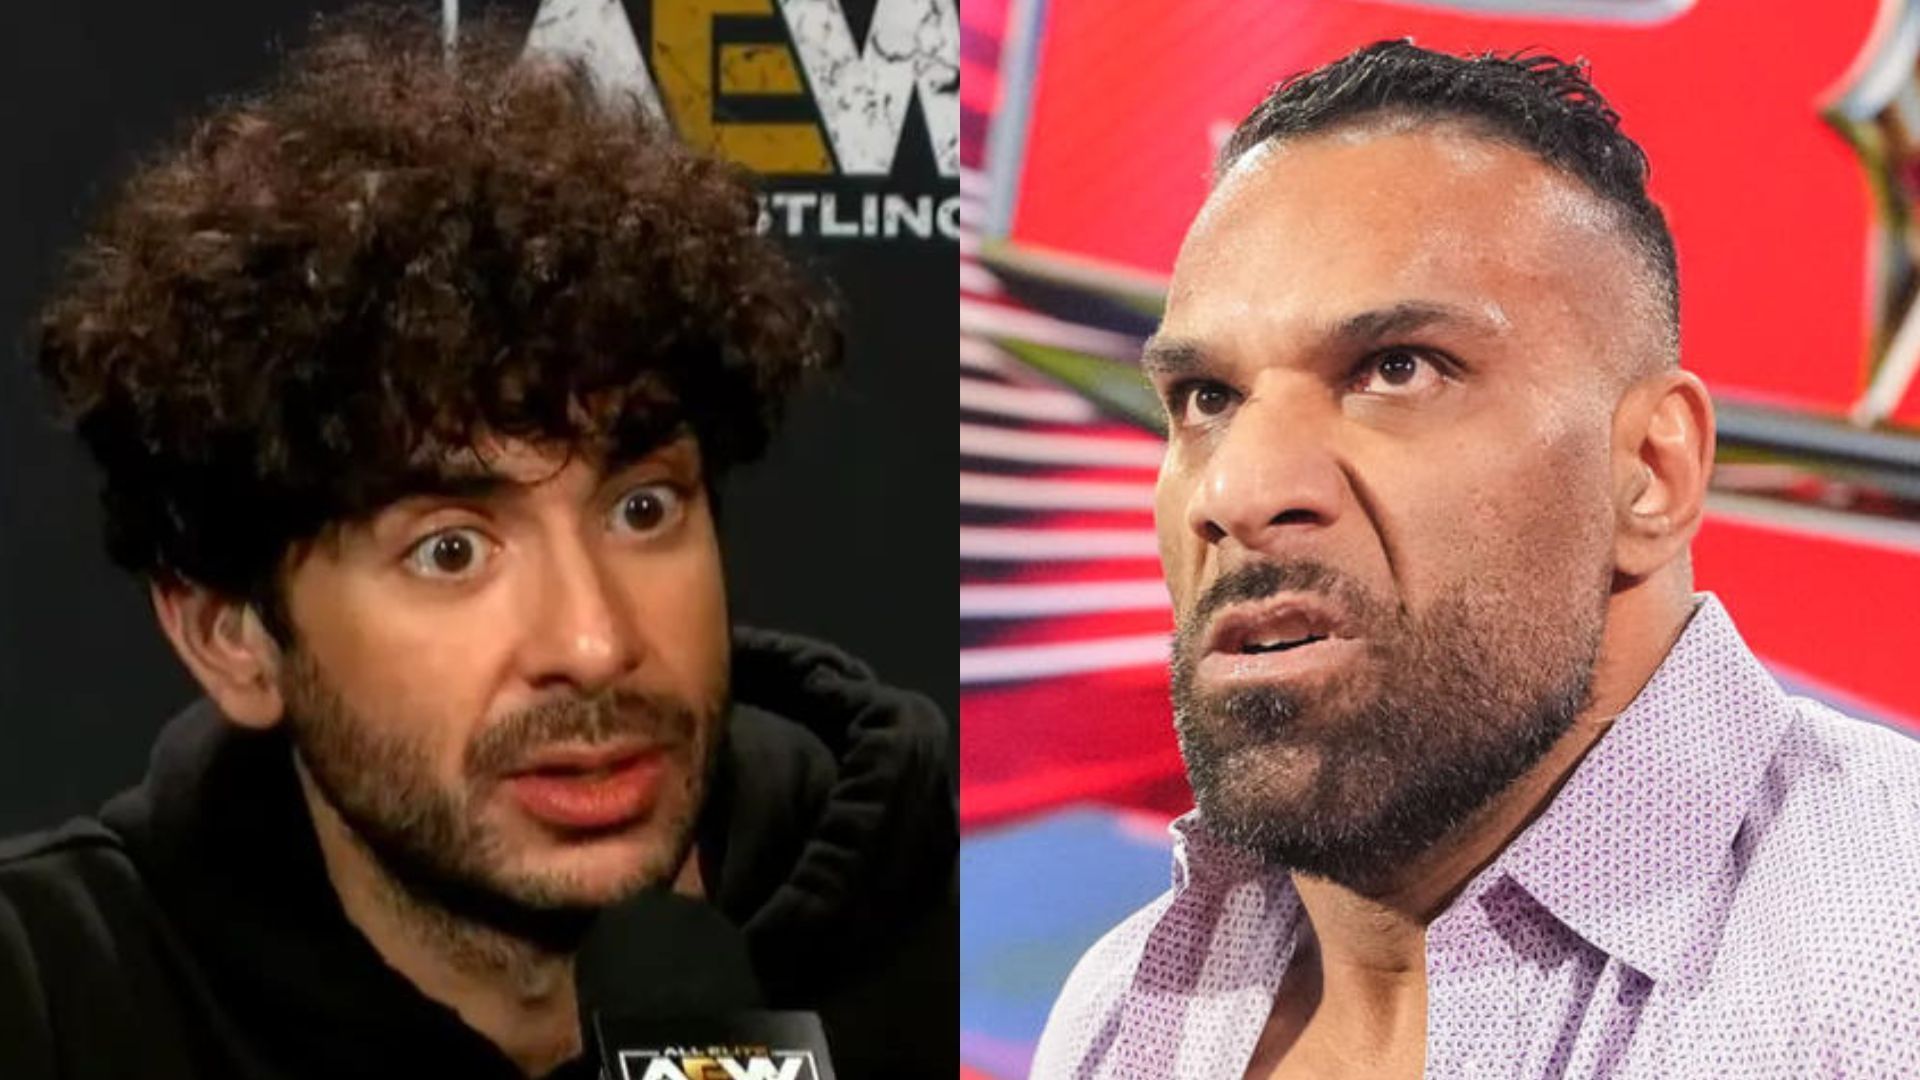 Mahal got into a war of words with AEW President Tony Khan.